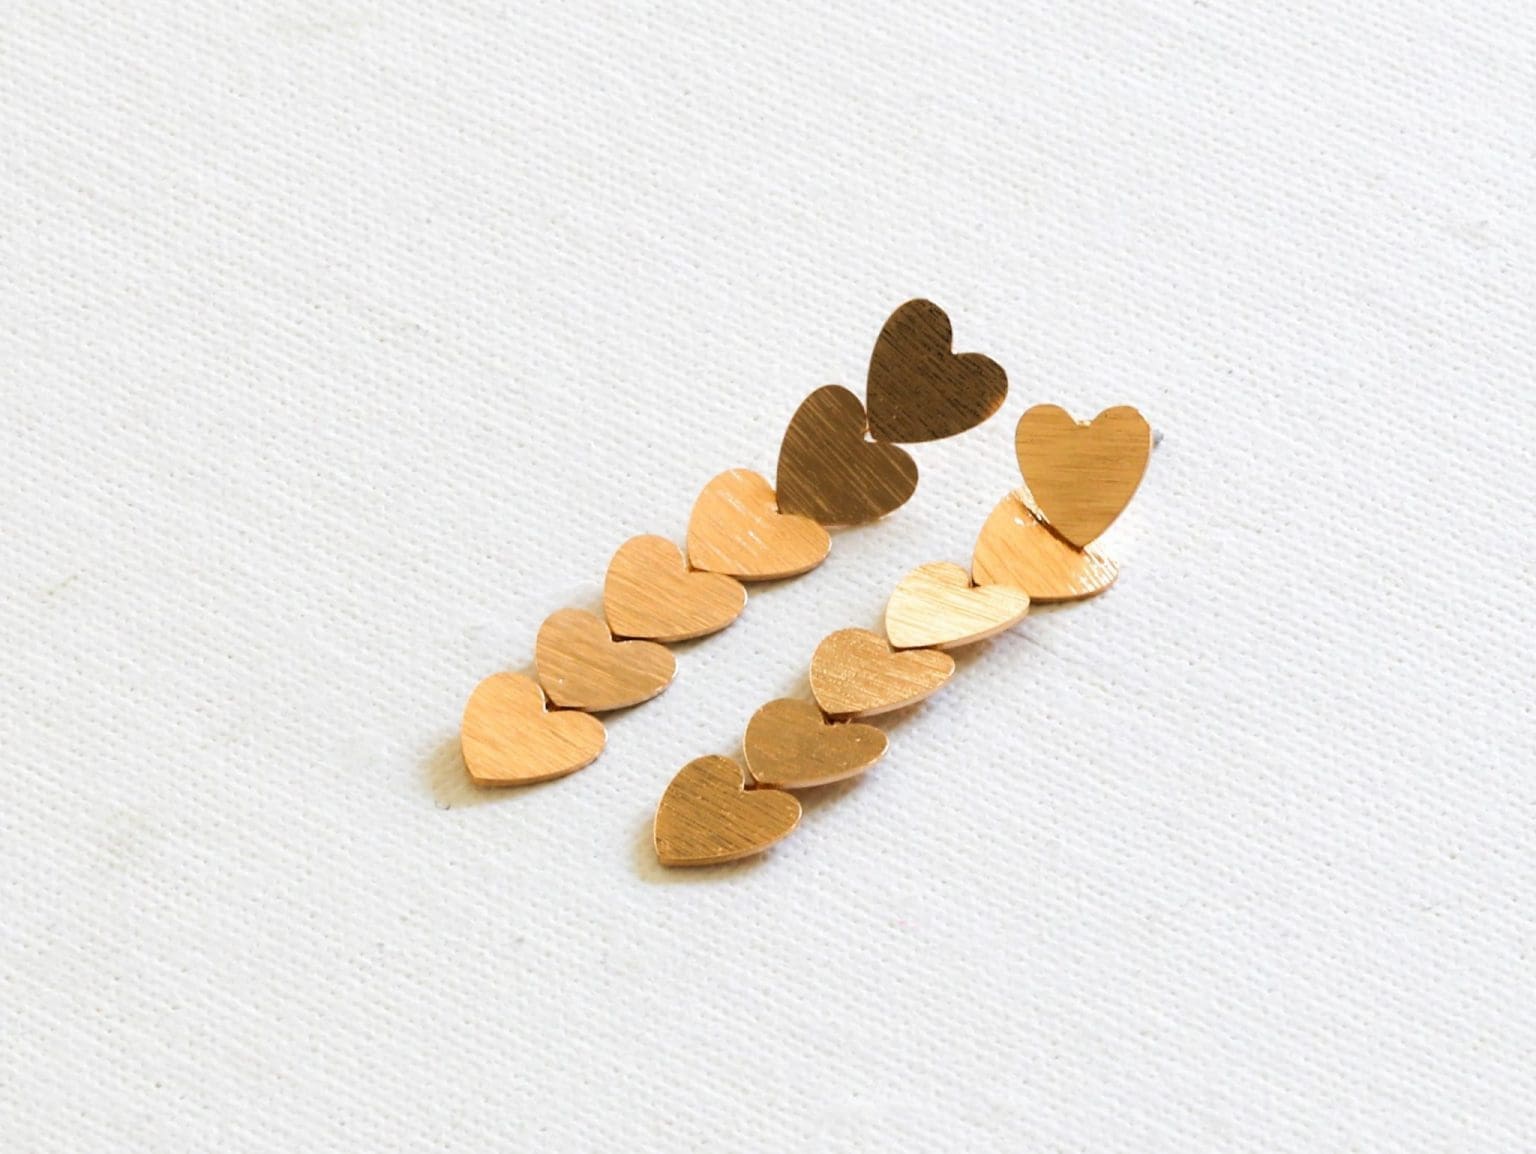 A pair of gold heart shaped earrings on a white surface.